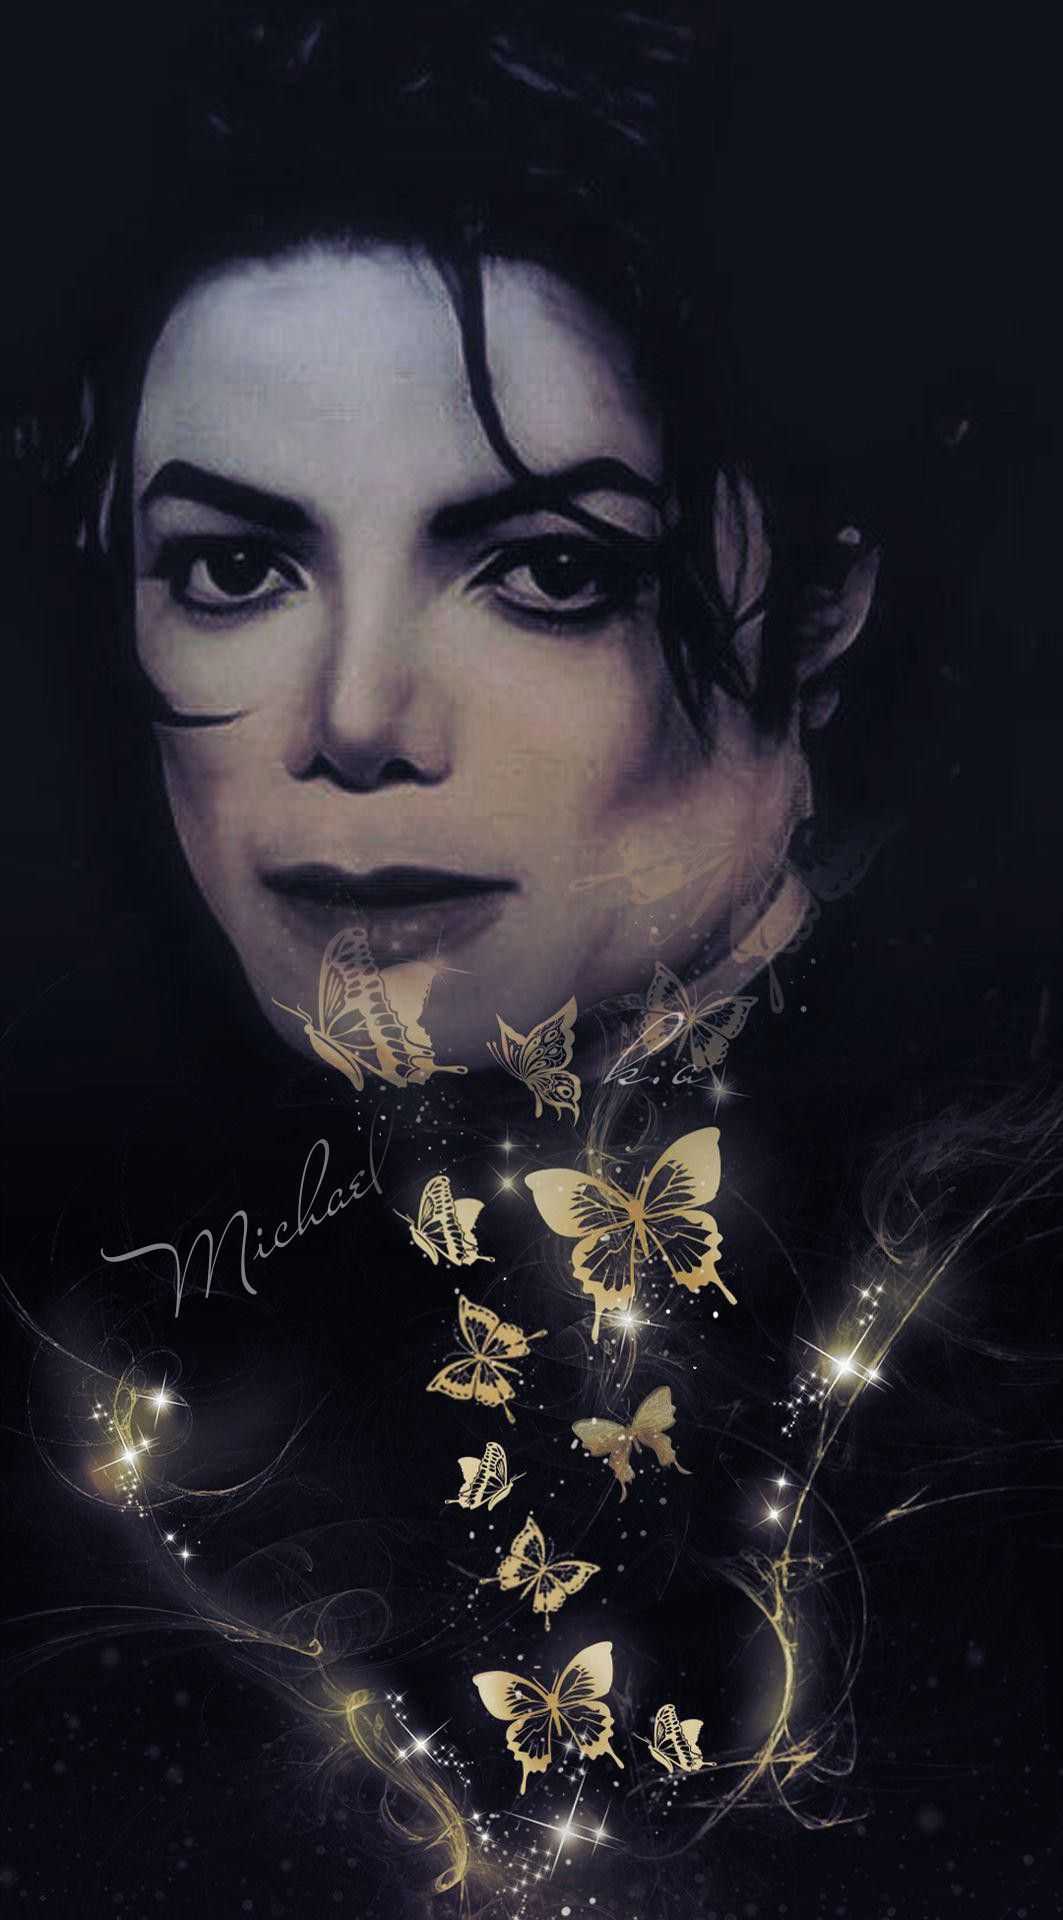 Iphone wallpaper Michael Jackson, created with photos and digital art, butterflys, black background, gold, black, white, portrait, eyes, glitter, stars, artistic, artistic wallpaper, artistic photos, artistic images, artistic design, artistic pictures, artistic artwork, artistic illustration, artistic drawings, artistic designs, artistic ideas, artistic creativity, artistic concepts, artistic concept art, artistic concept images, artistic concept design, artistic concept pictures, artistic concept artwork, artistic concept illustrations, artistic concept drawings, artistic concept ideas, artistic concept creativity, artistic concept - Michael Jackson